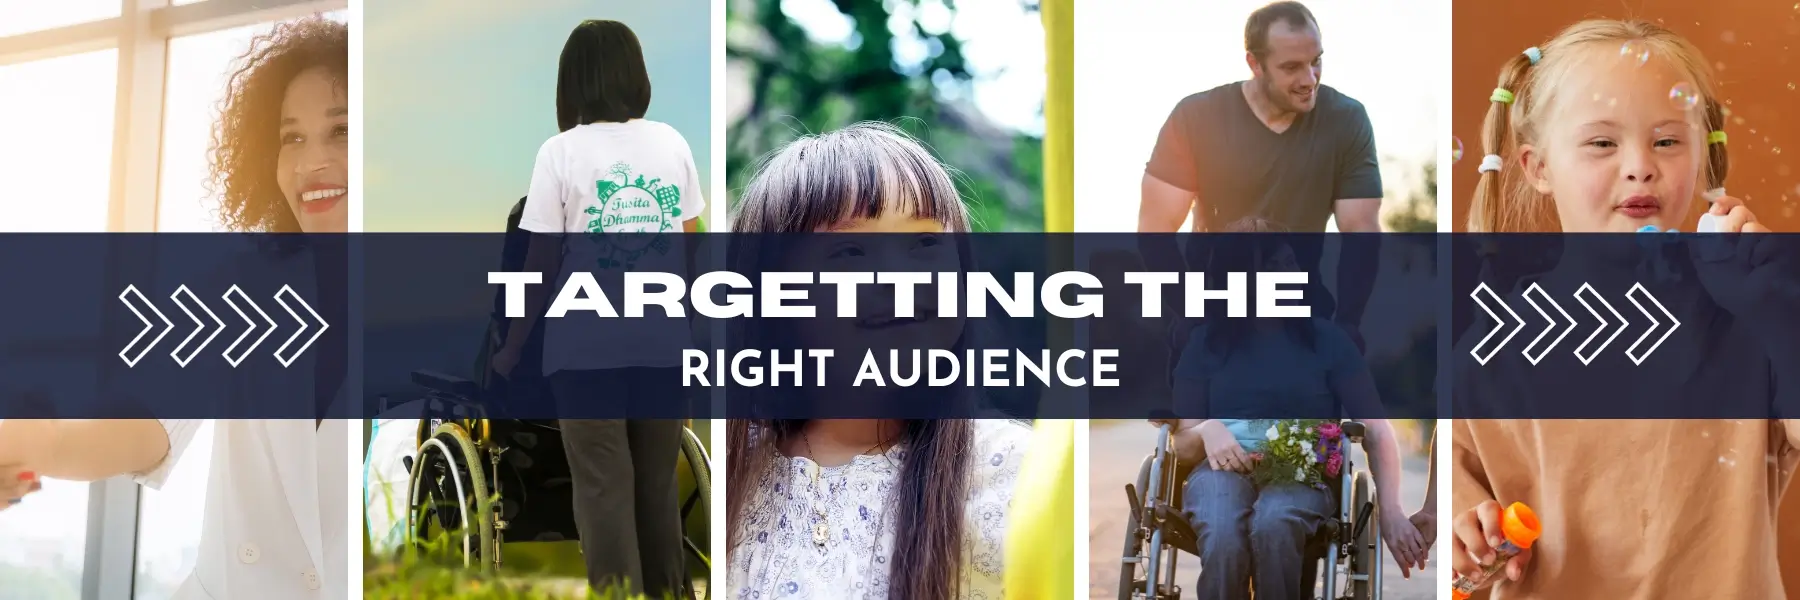 Targetting the right audience